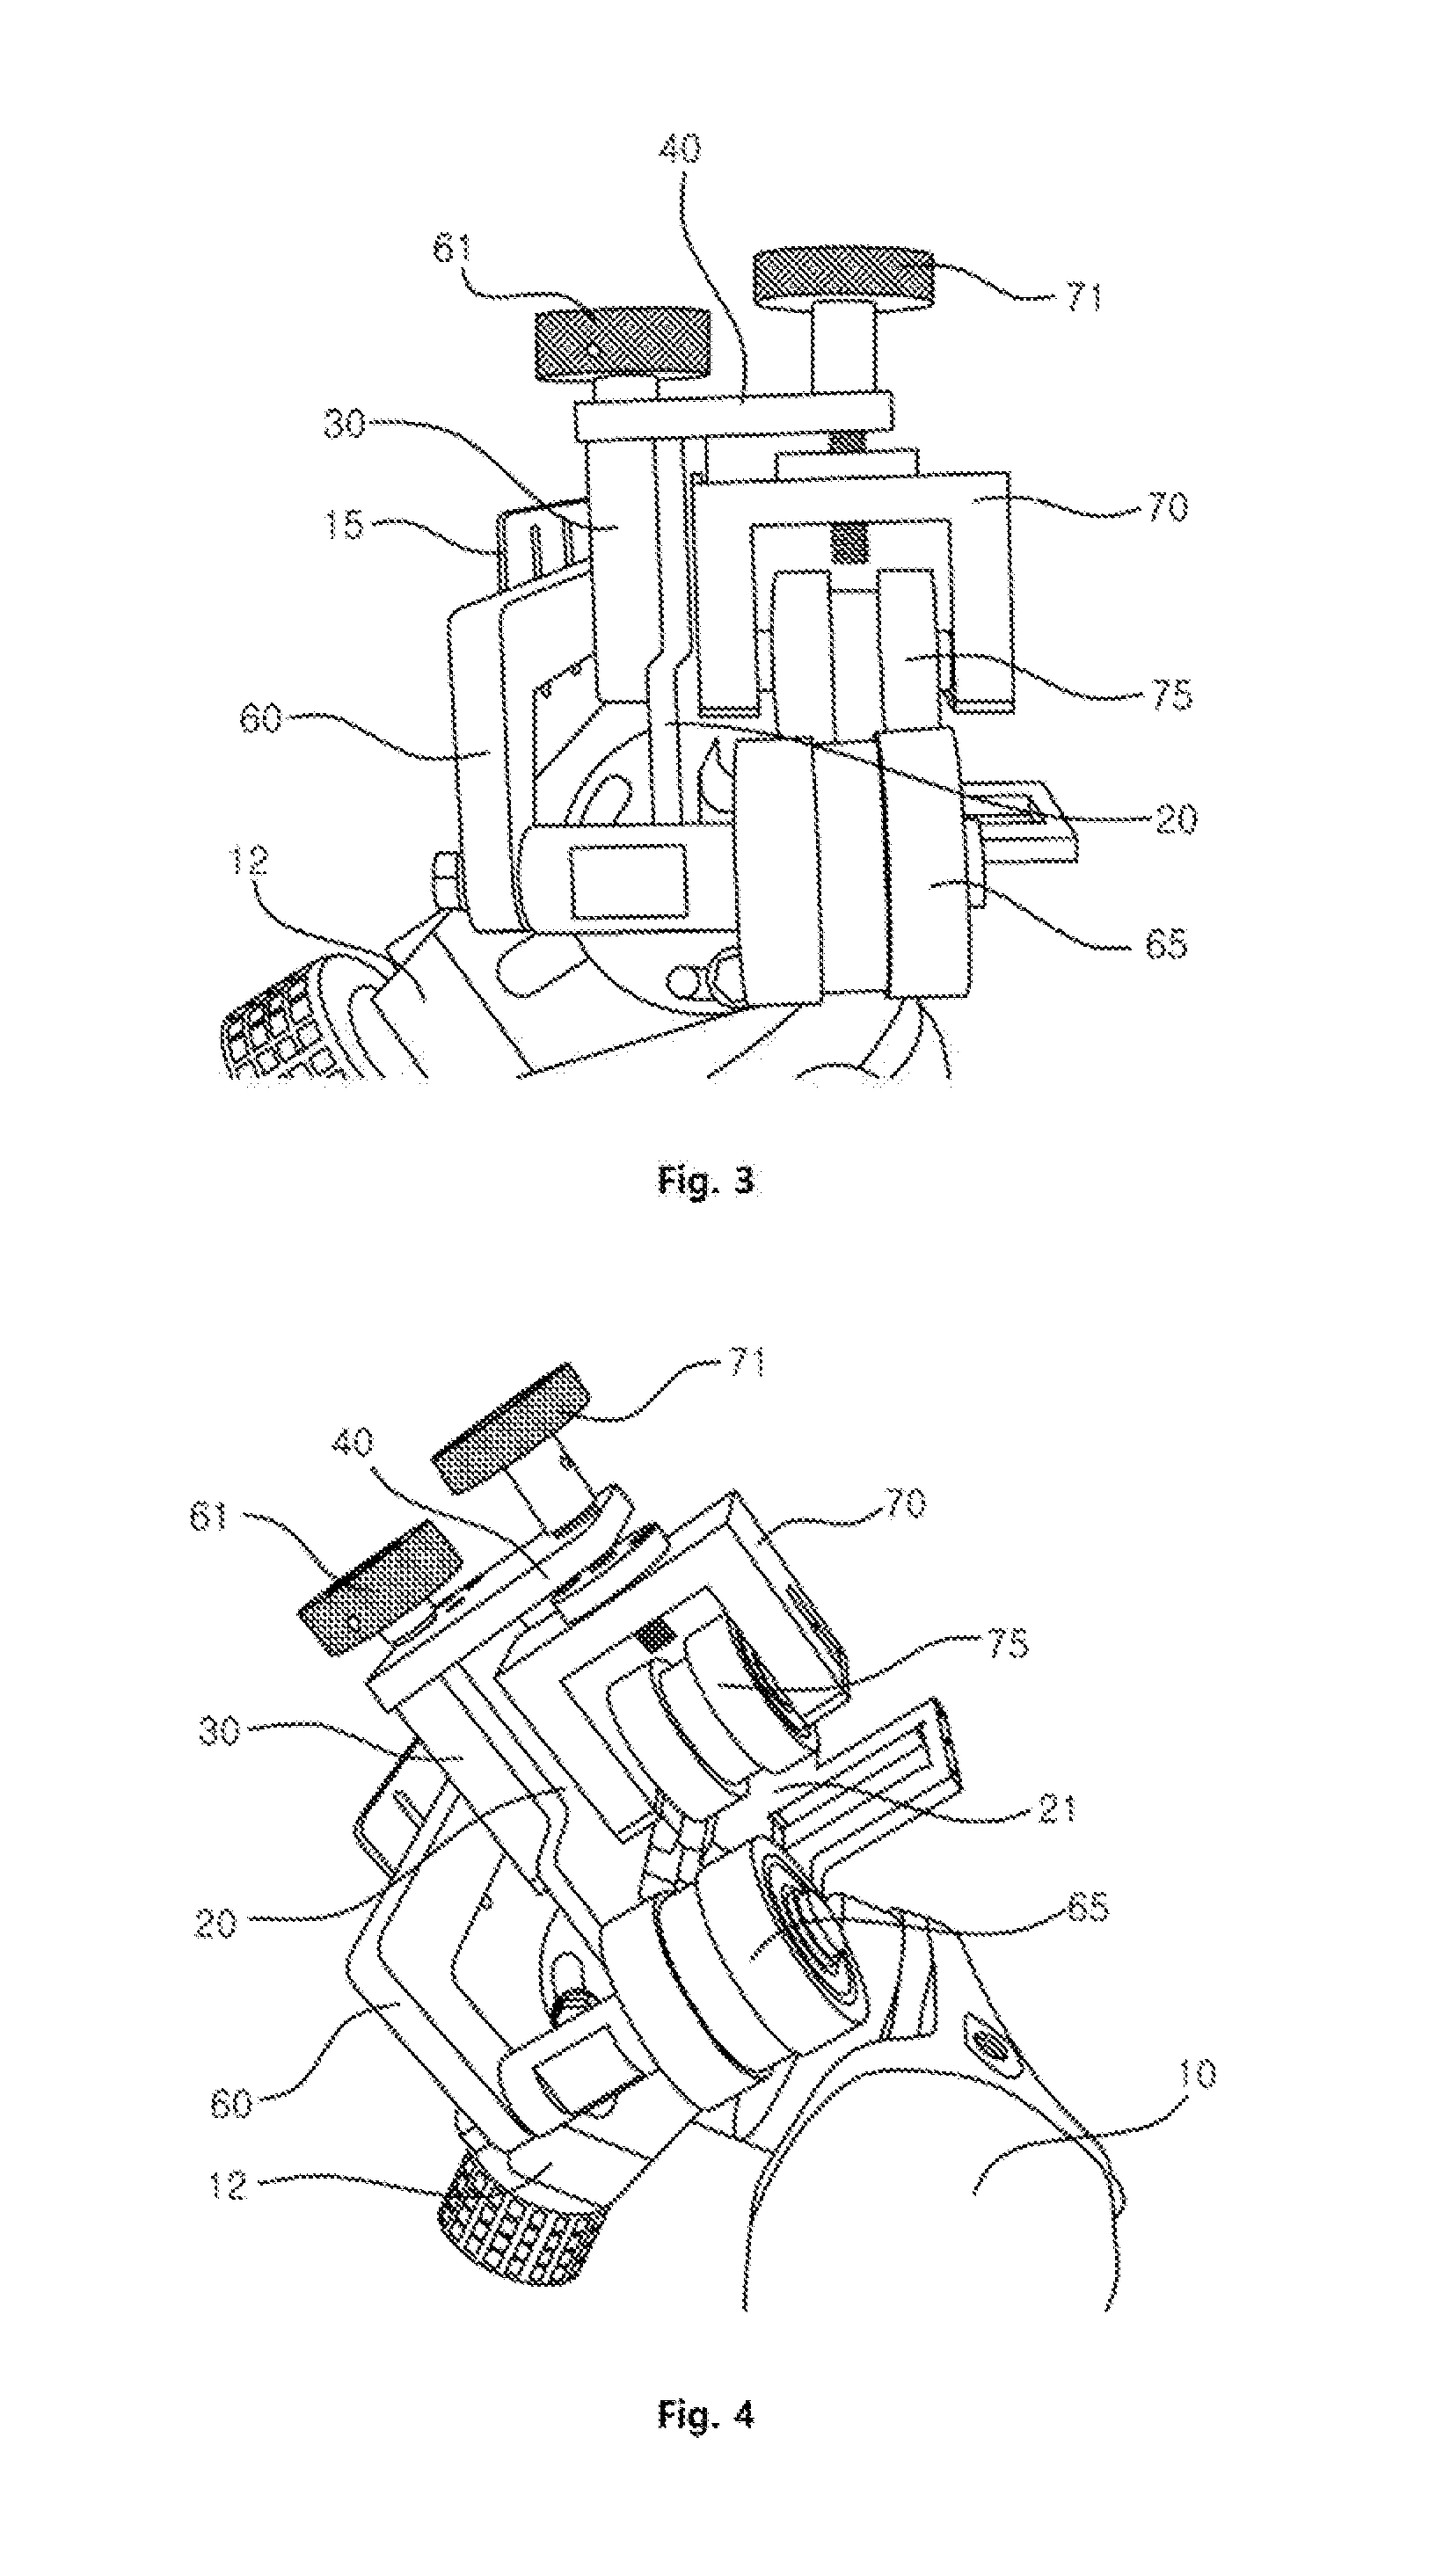 Portable pipe outer diameter-chamfering apparatus with improved weldability